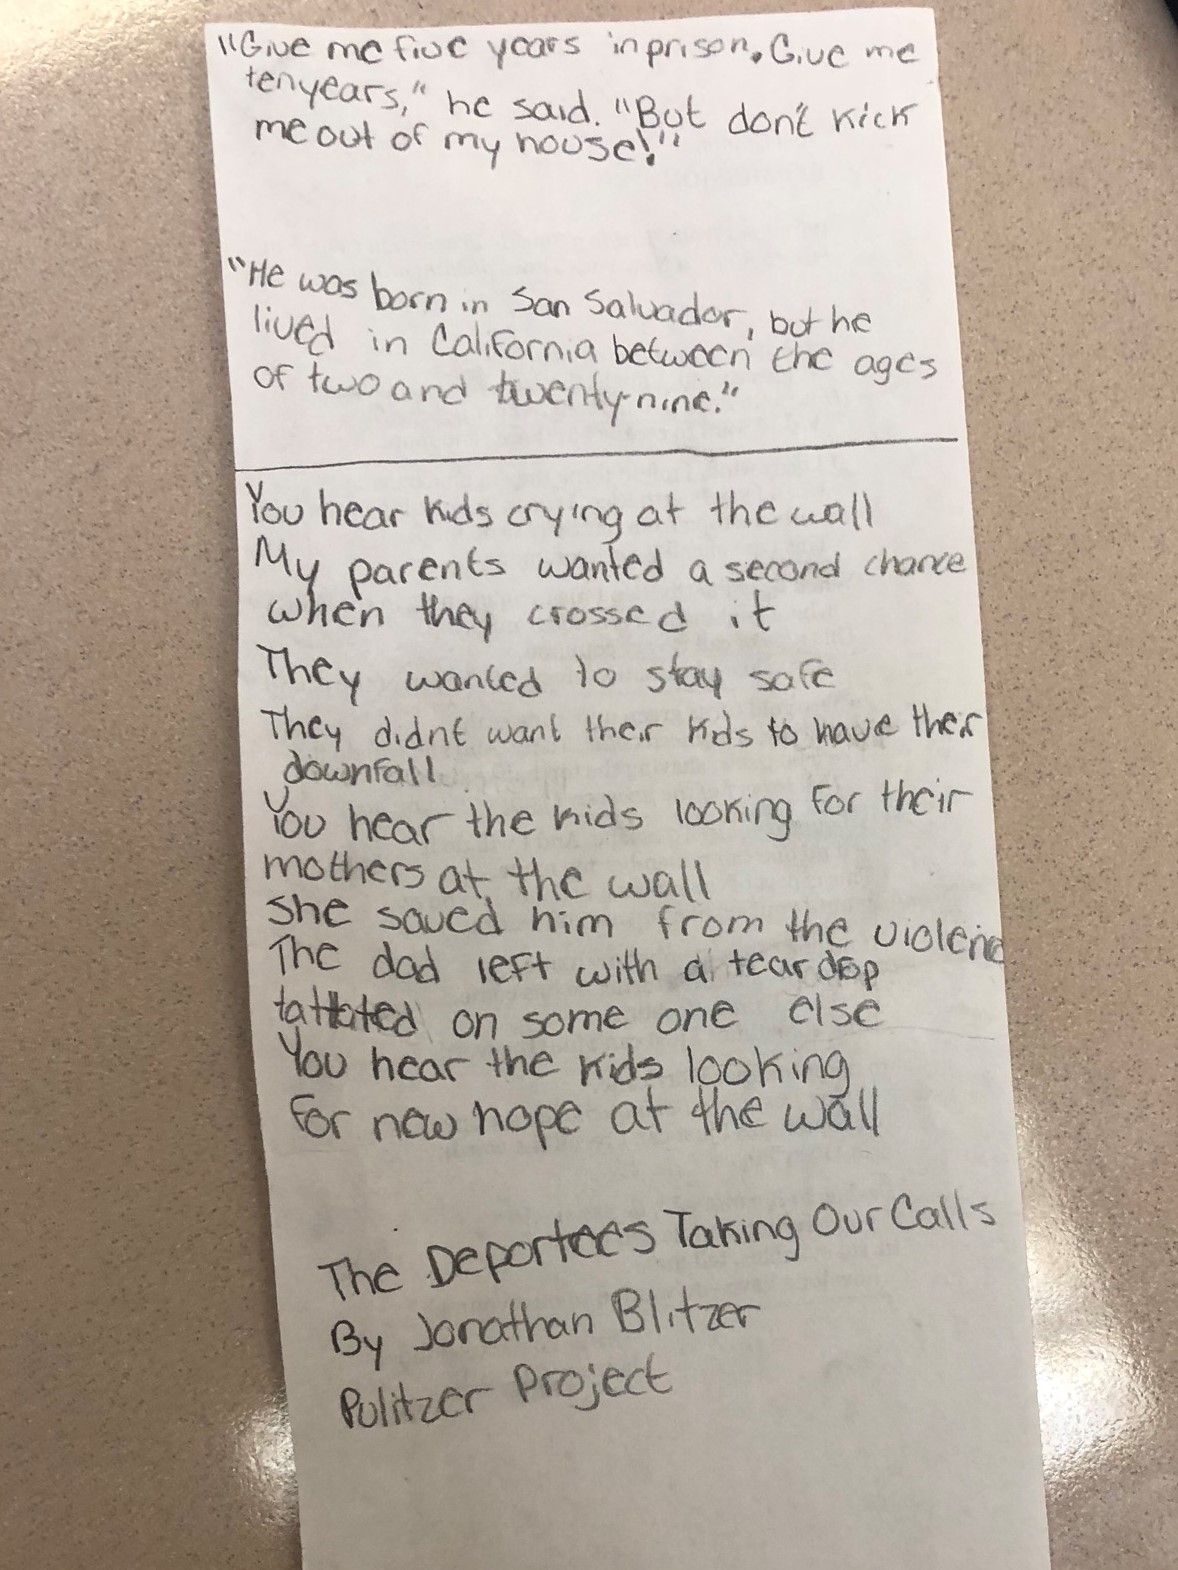 Poem by a 7th grade student at Miles Davis Magnet Academy, written in response to "The Deportees Taking Our Calls" by Jonathan Blitzer. Image by Hannah Berk. United States, 2019.